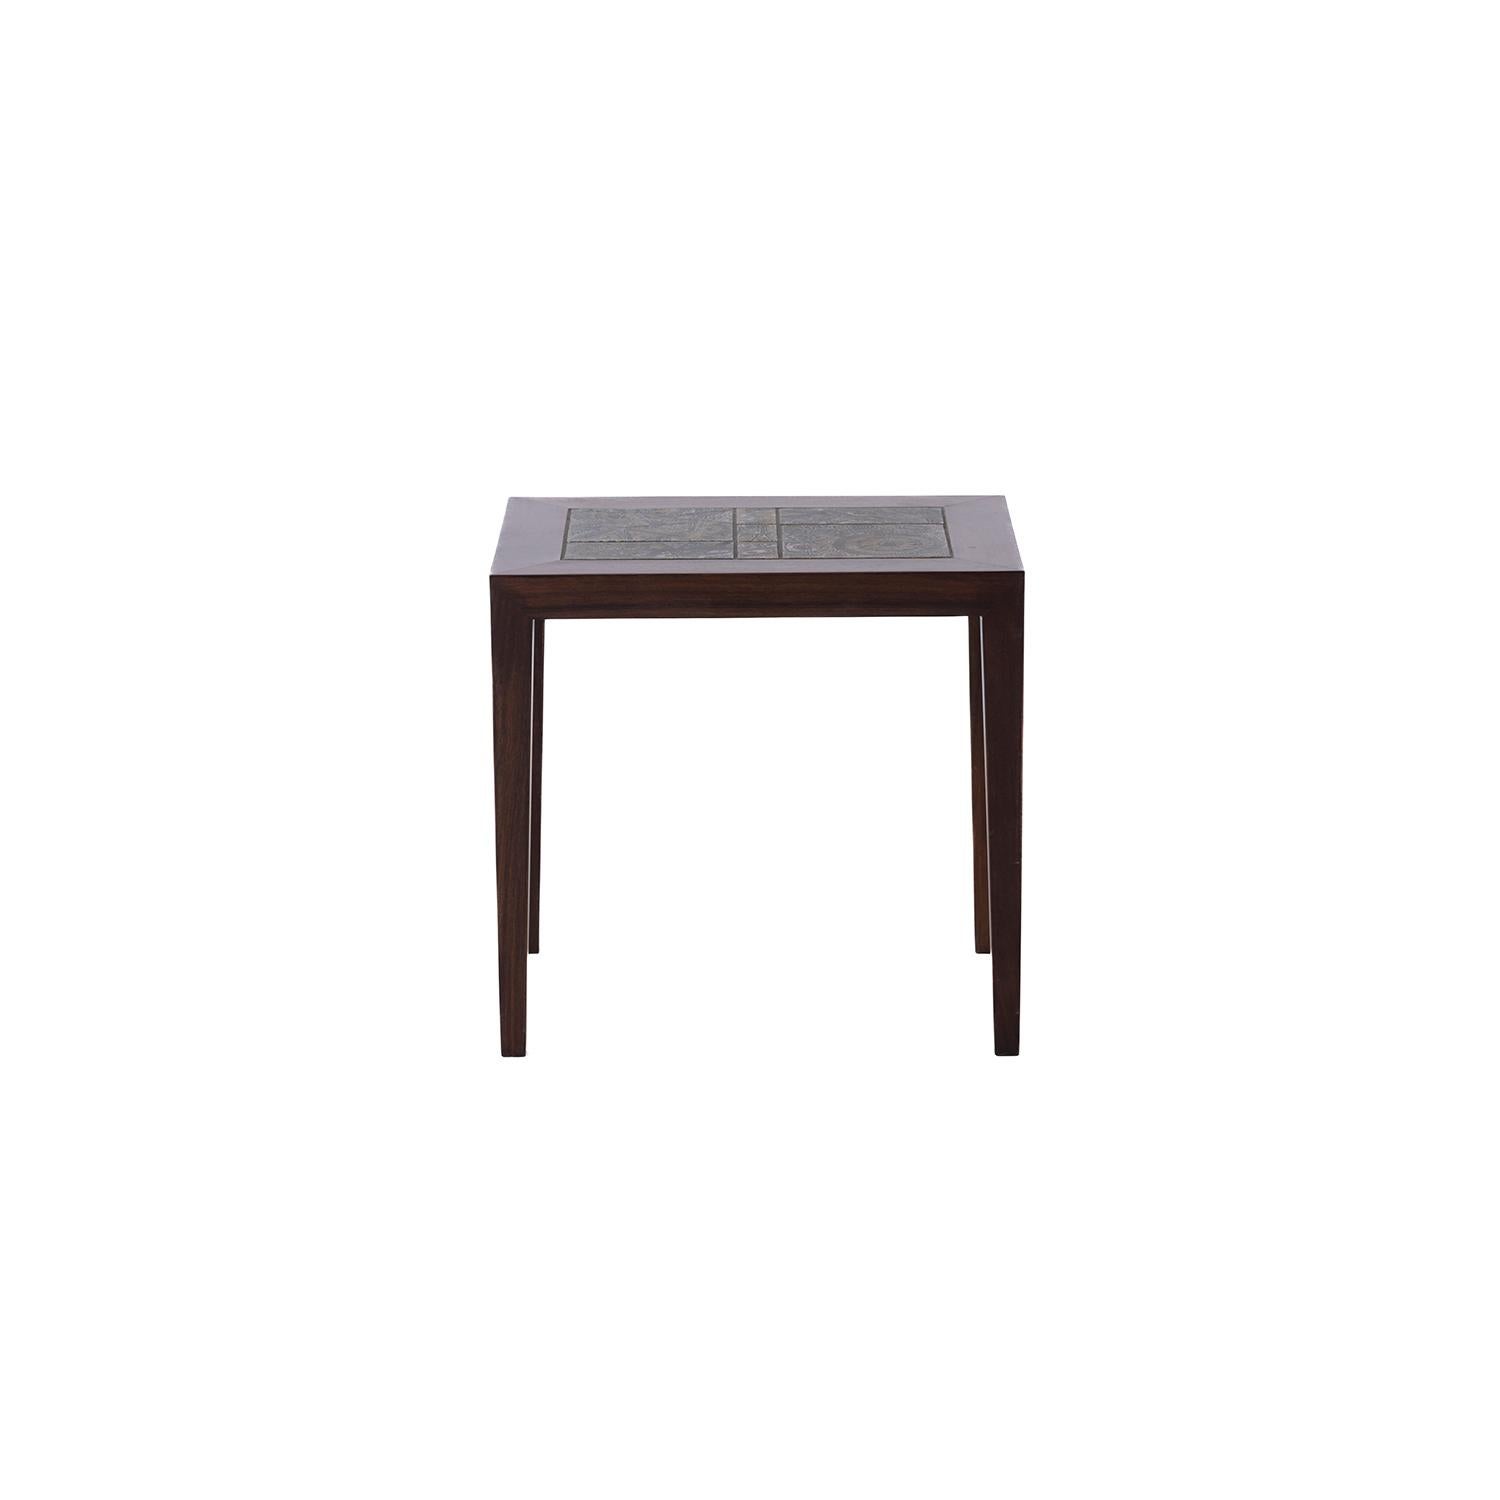 Danish modern rosewood occasional table designed by Severin Hansen. Inlayed with Royal Copenhagen tile designed by Nils Thorsson. 



Professional, skilled furniture restoration is an integral part of what we do every day. Our goal is to provide